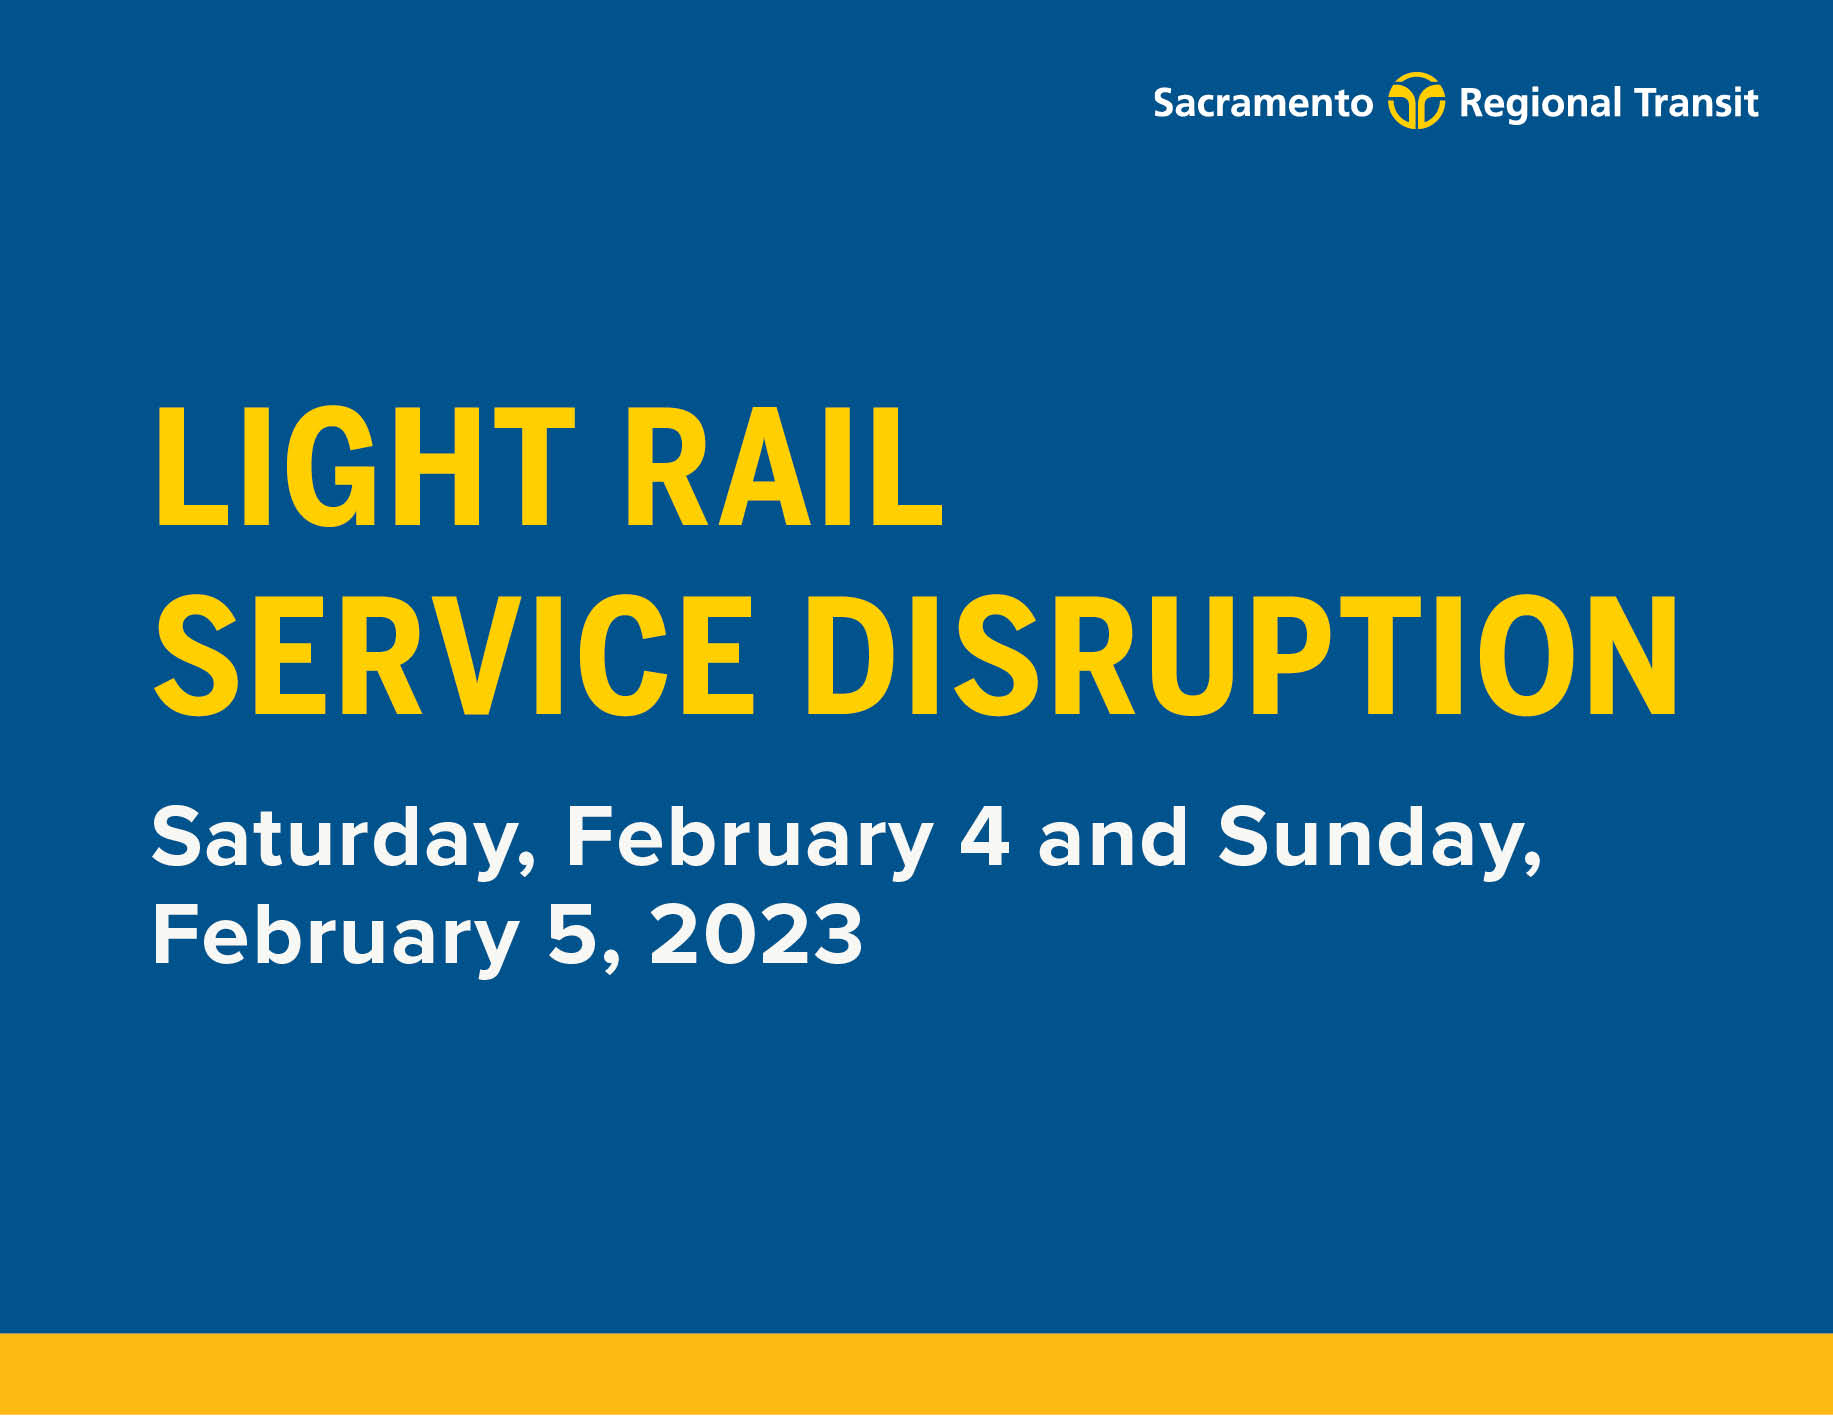 SacRT launches biggest light rail modernization project in its history. Here’s what you need to know: